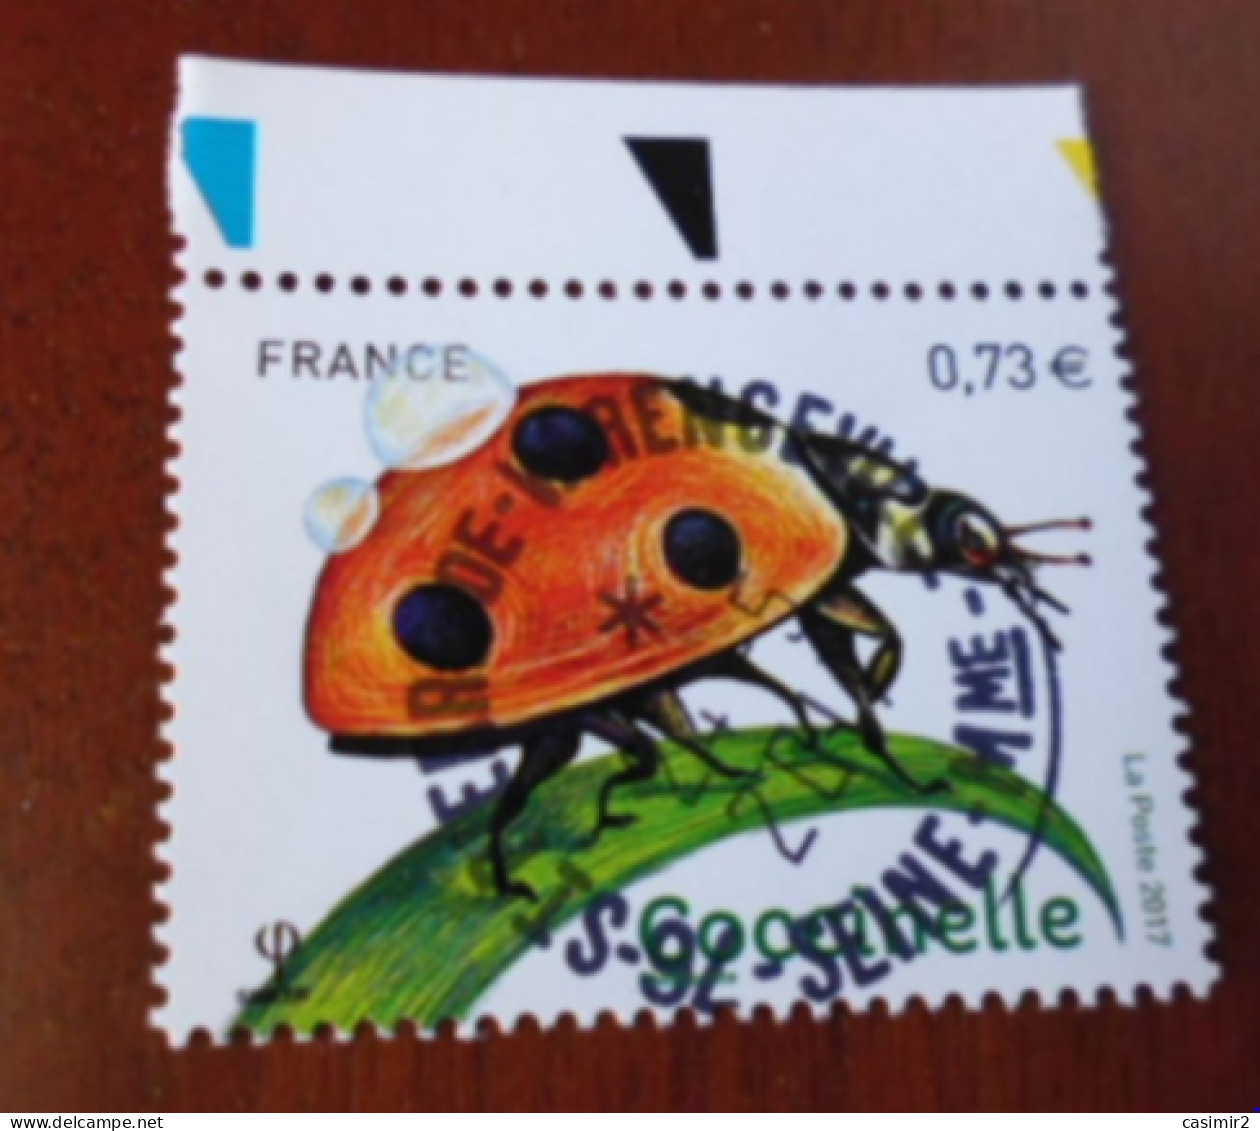 PROMOTION  OBLITERATION RONDE SUR TIMBRE NEUF COCCINELLE YVERT N°5147 - Used Stamps